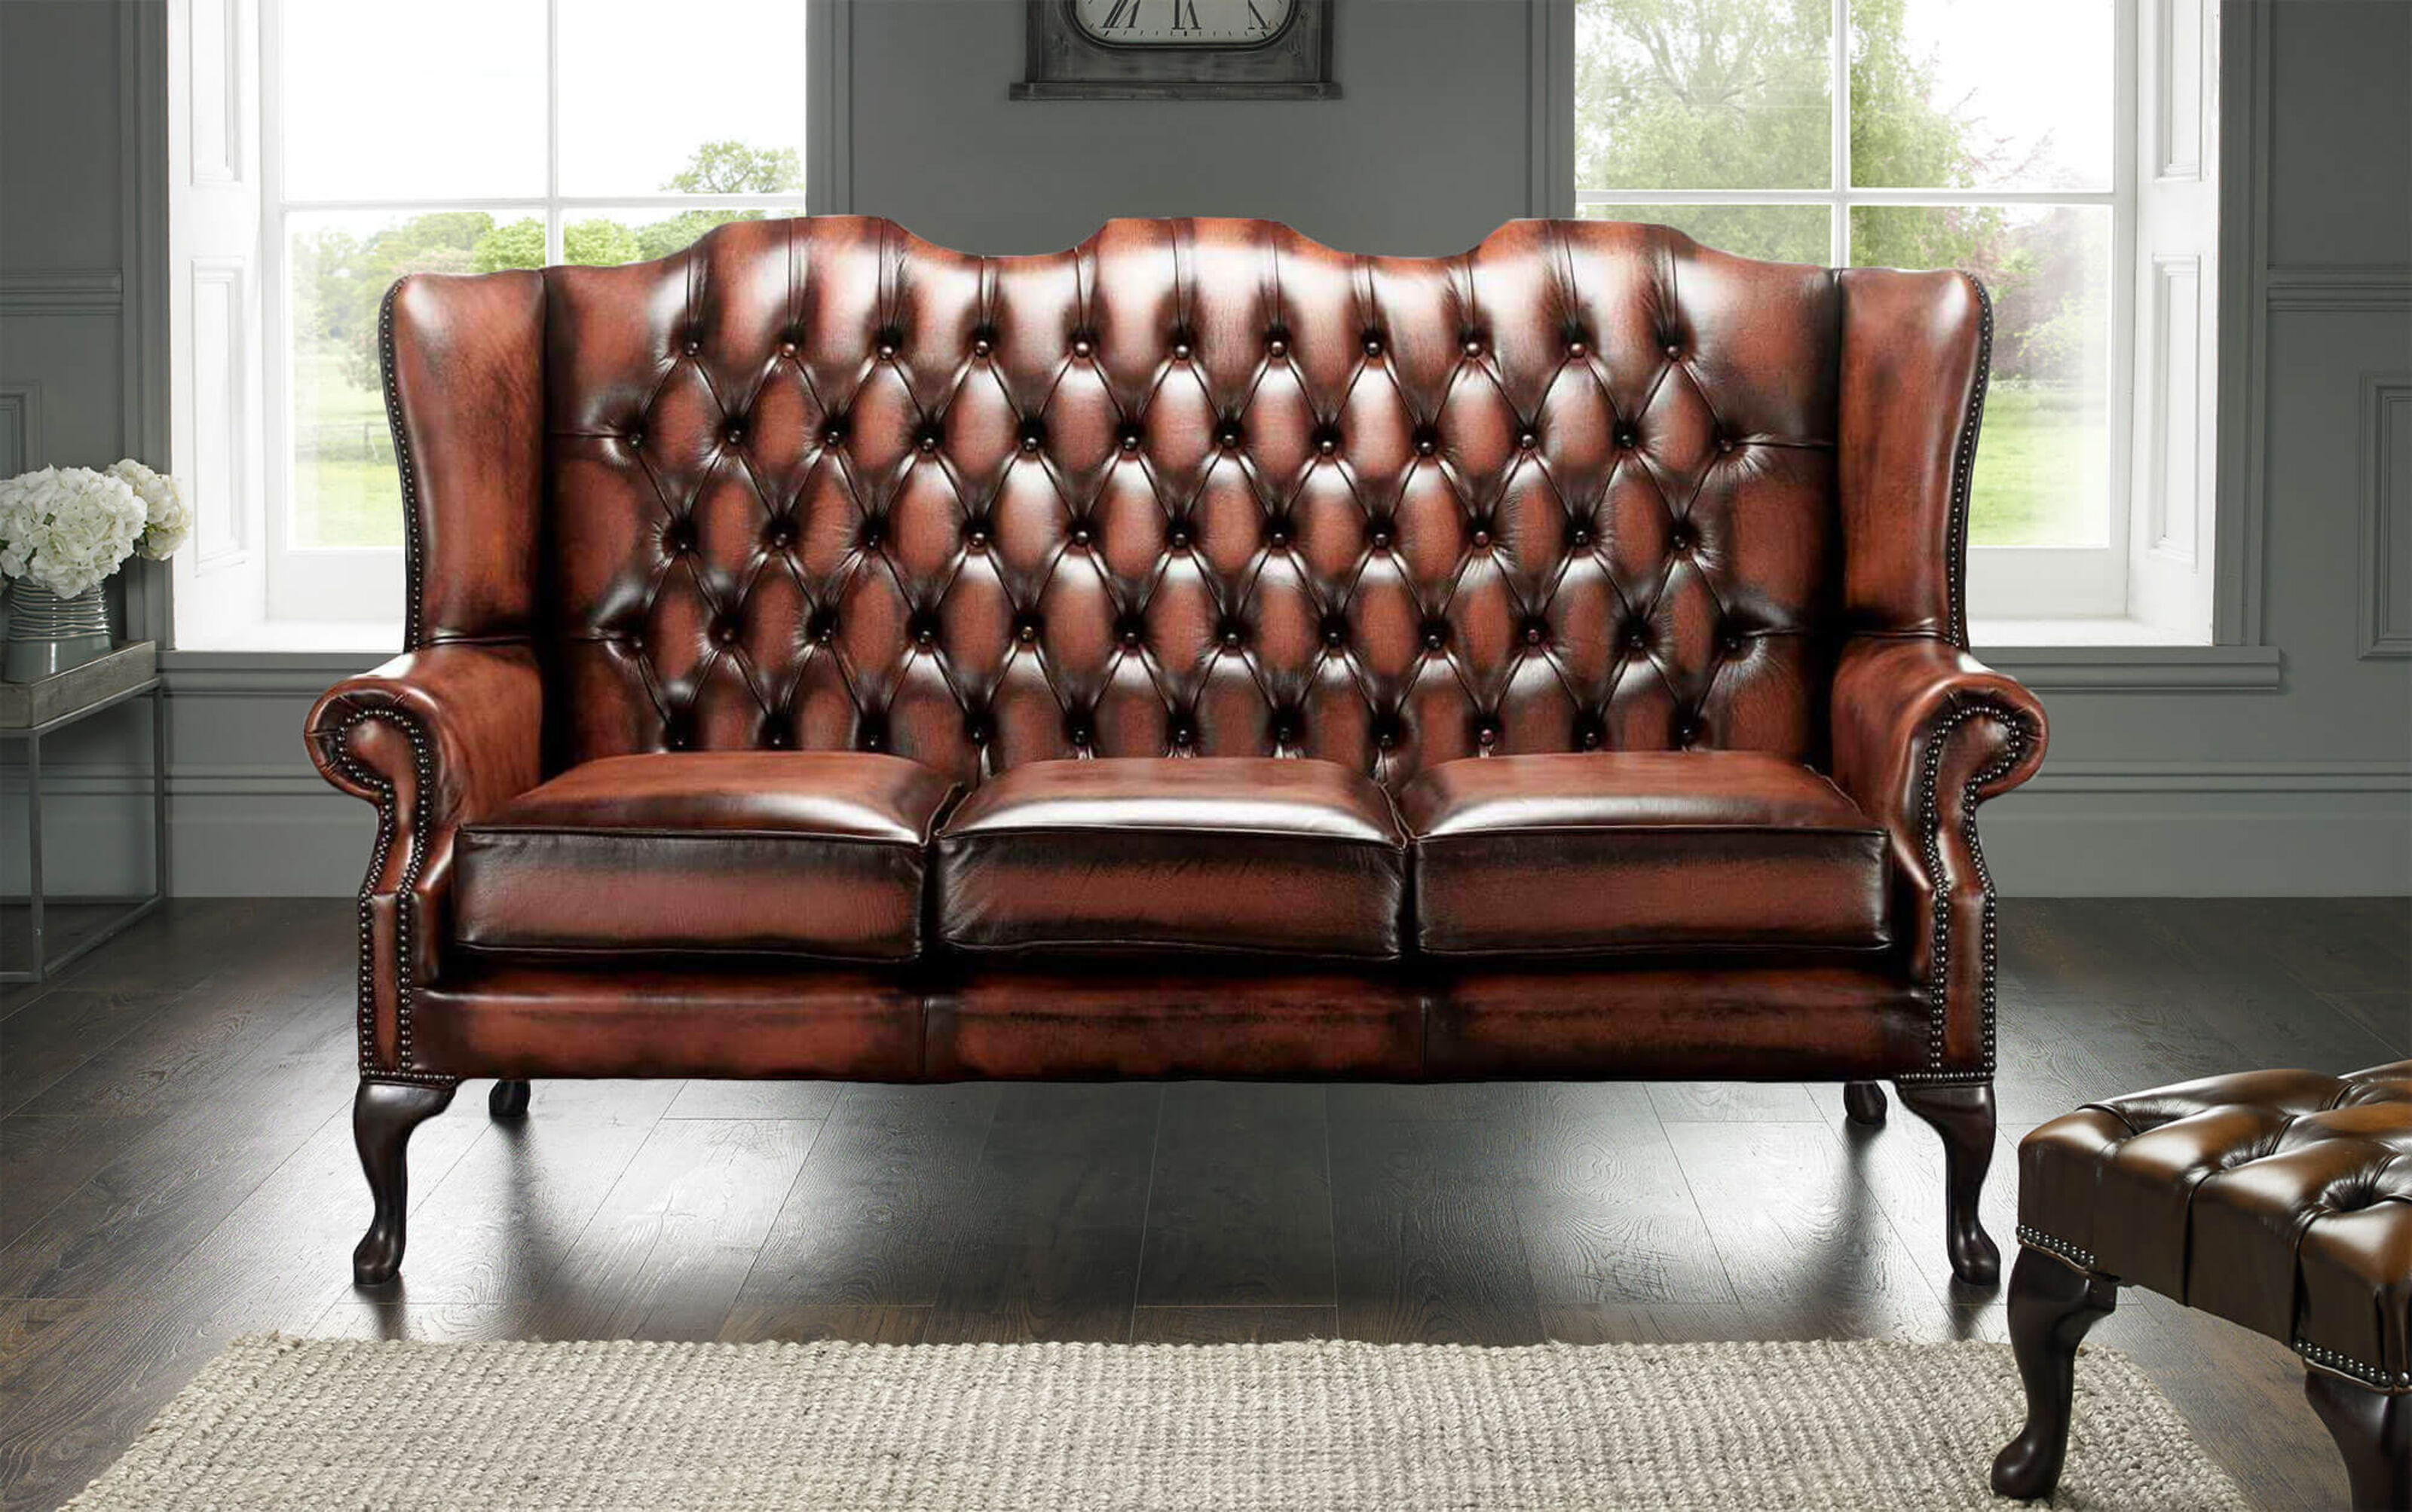 Chesterfield Sofas: A Royal History of Elegance  %Post Title